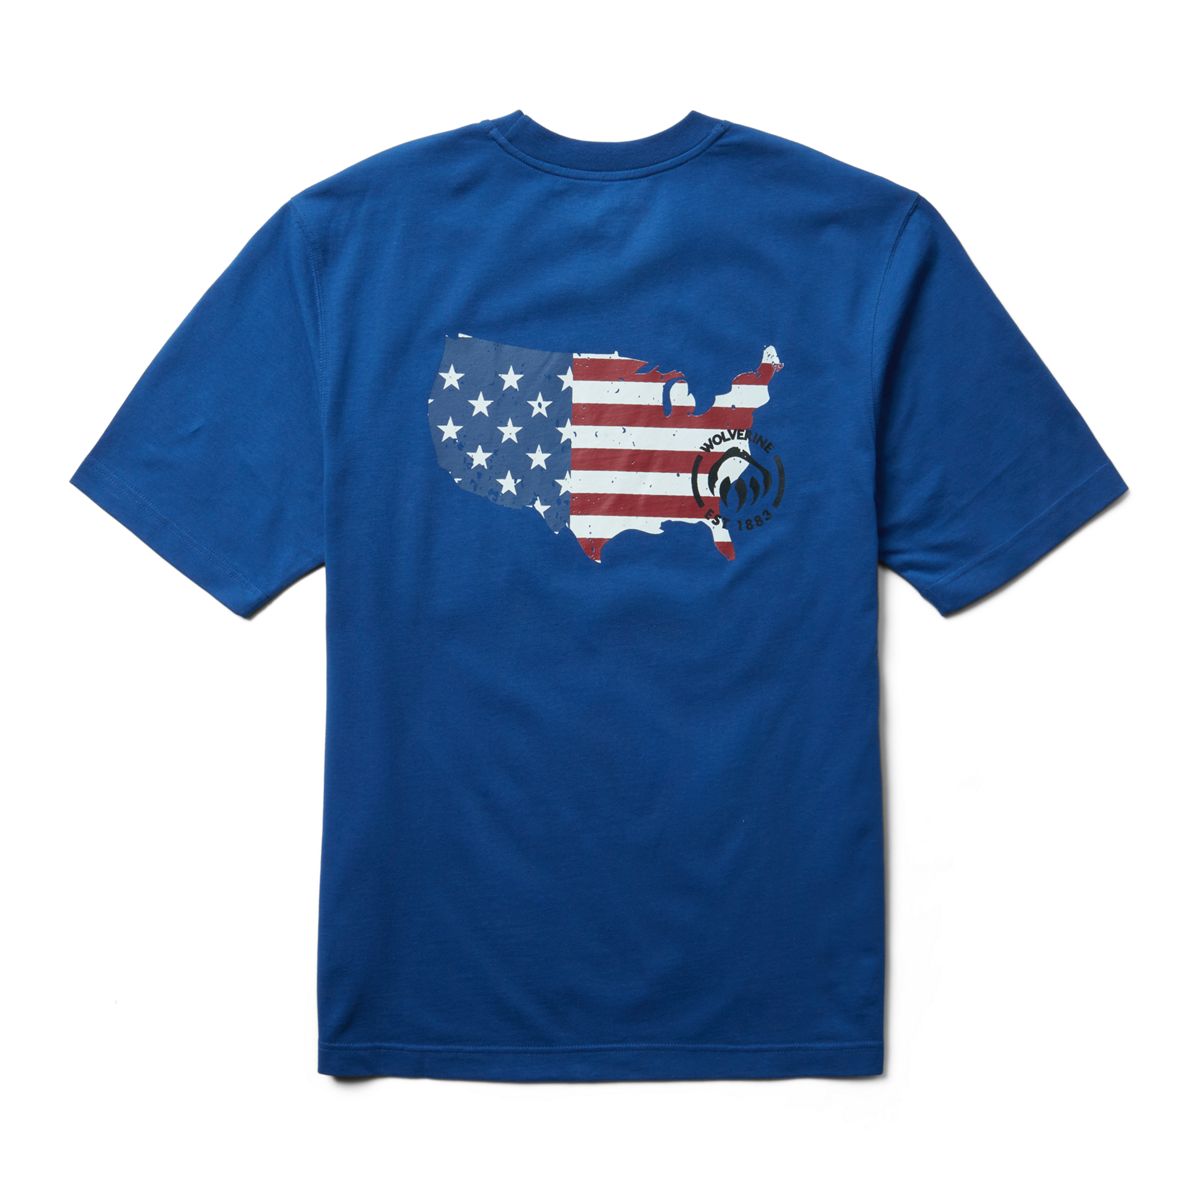 Traditional Fit Short Sleeve Graphic Tee, Horizon Blue - America, dynamic 2